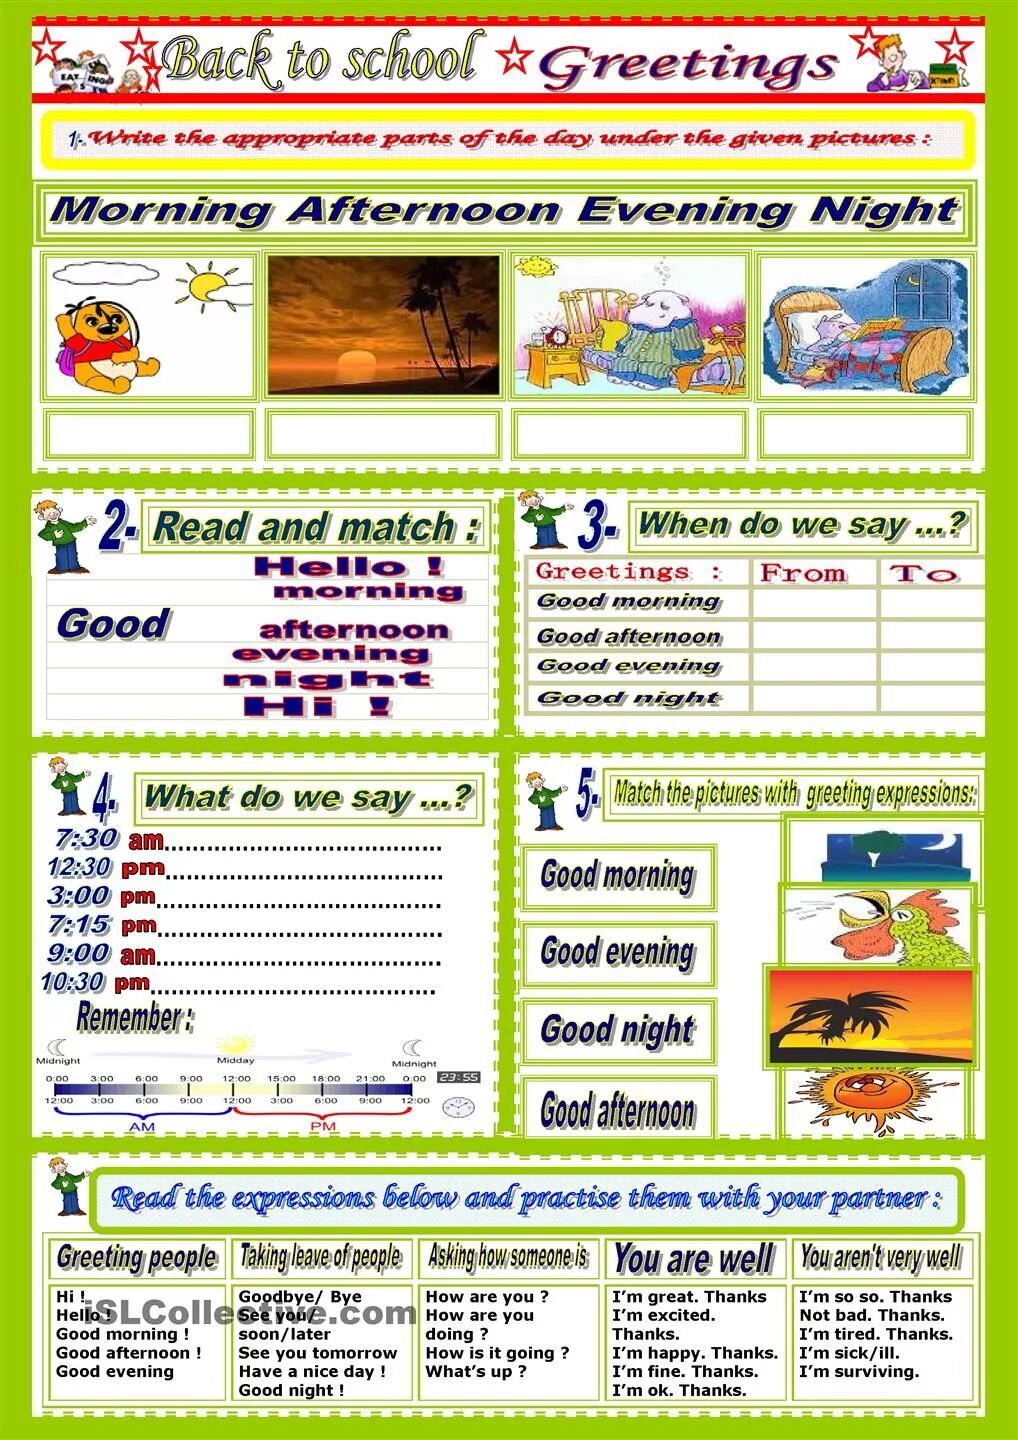 Parts of the Day Worksheets. Parts of the Day ESL. Morning afternoon Worksheet. Morning afternoon Evening Night Worksheet. What did you in the afternoon